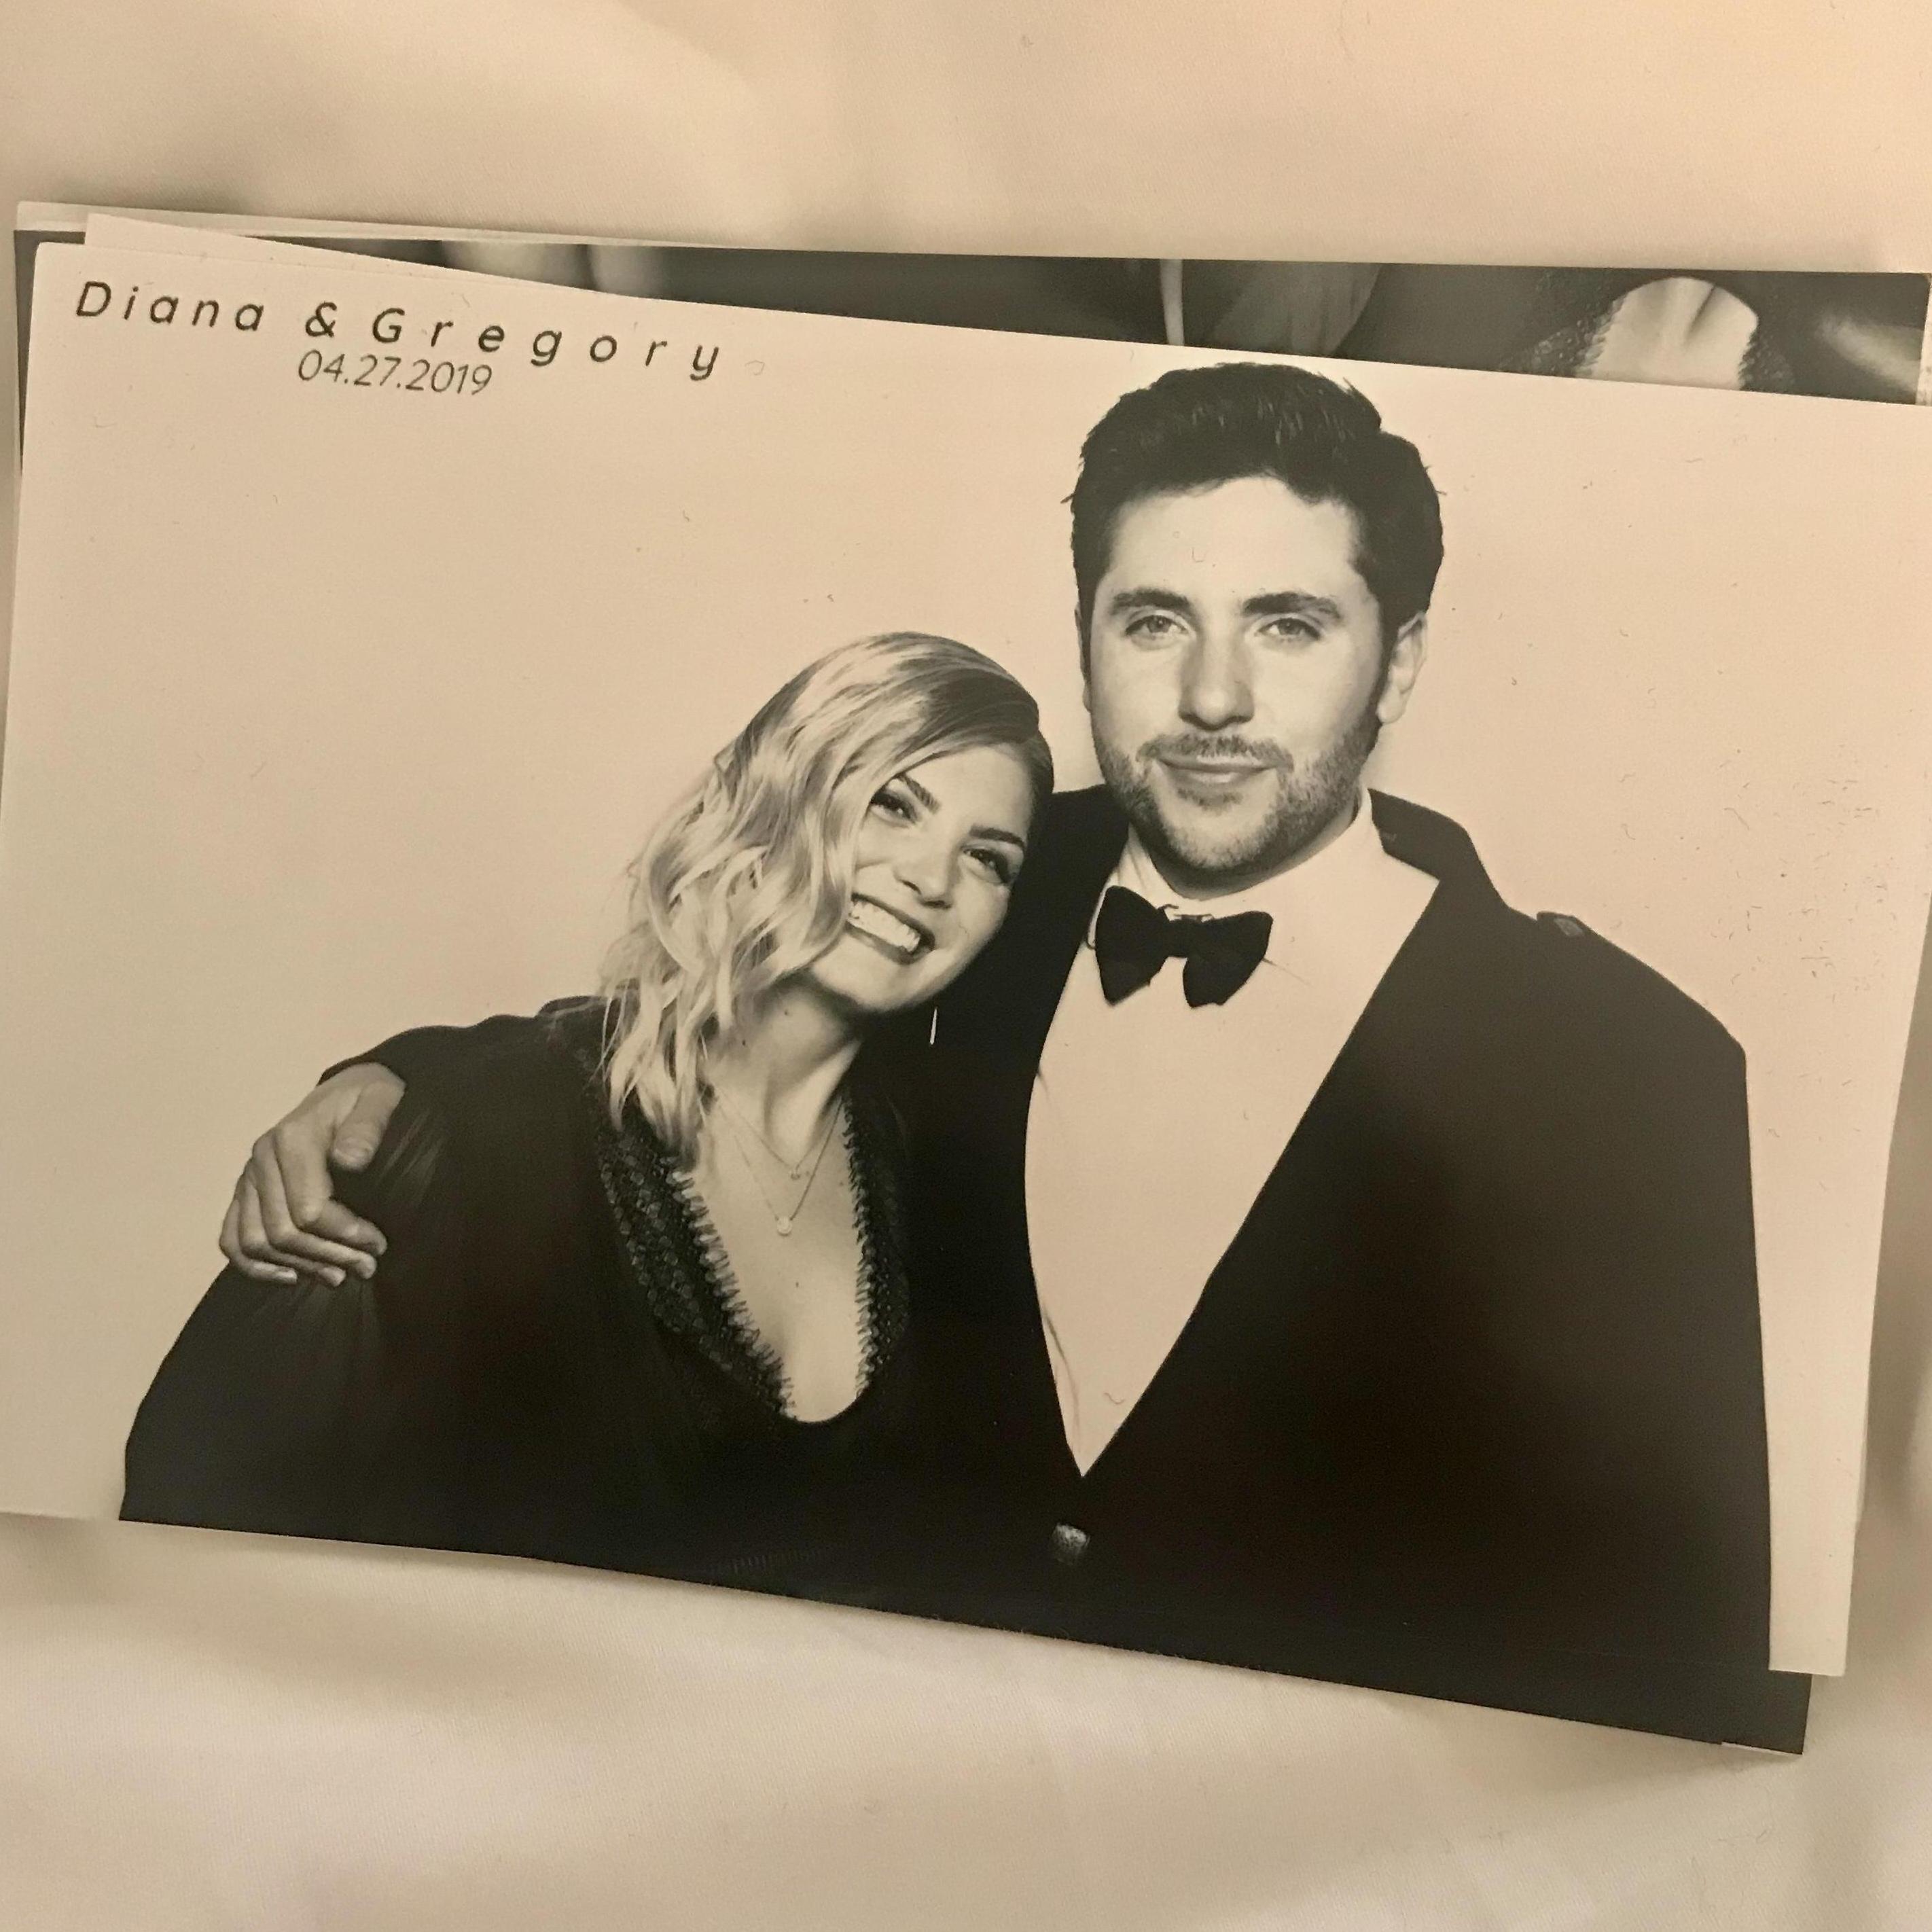 Enjoying the photo booth at Greg and Diana's wedding in LA
2019